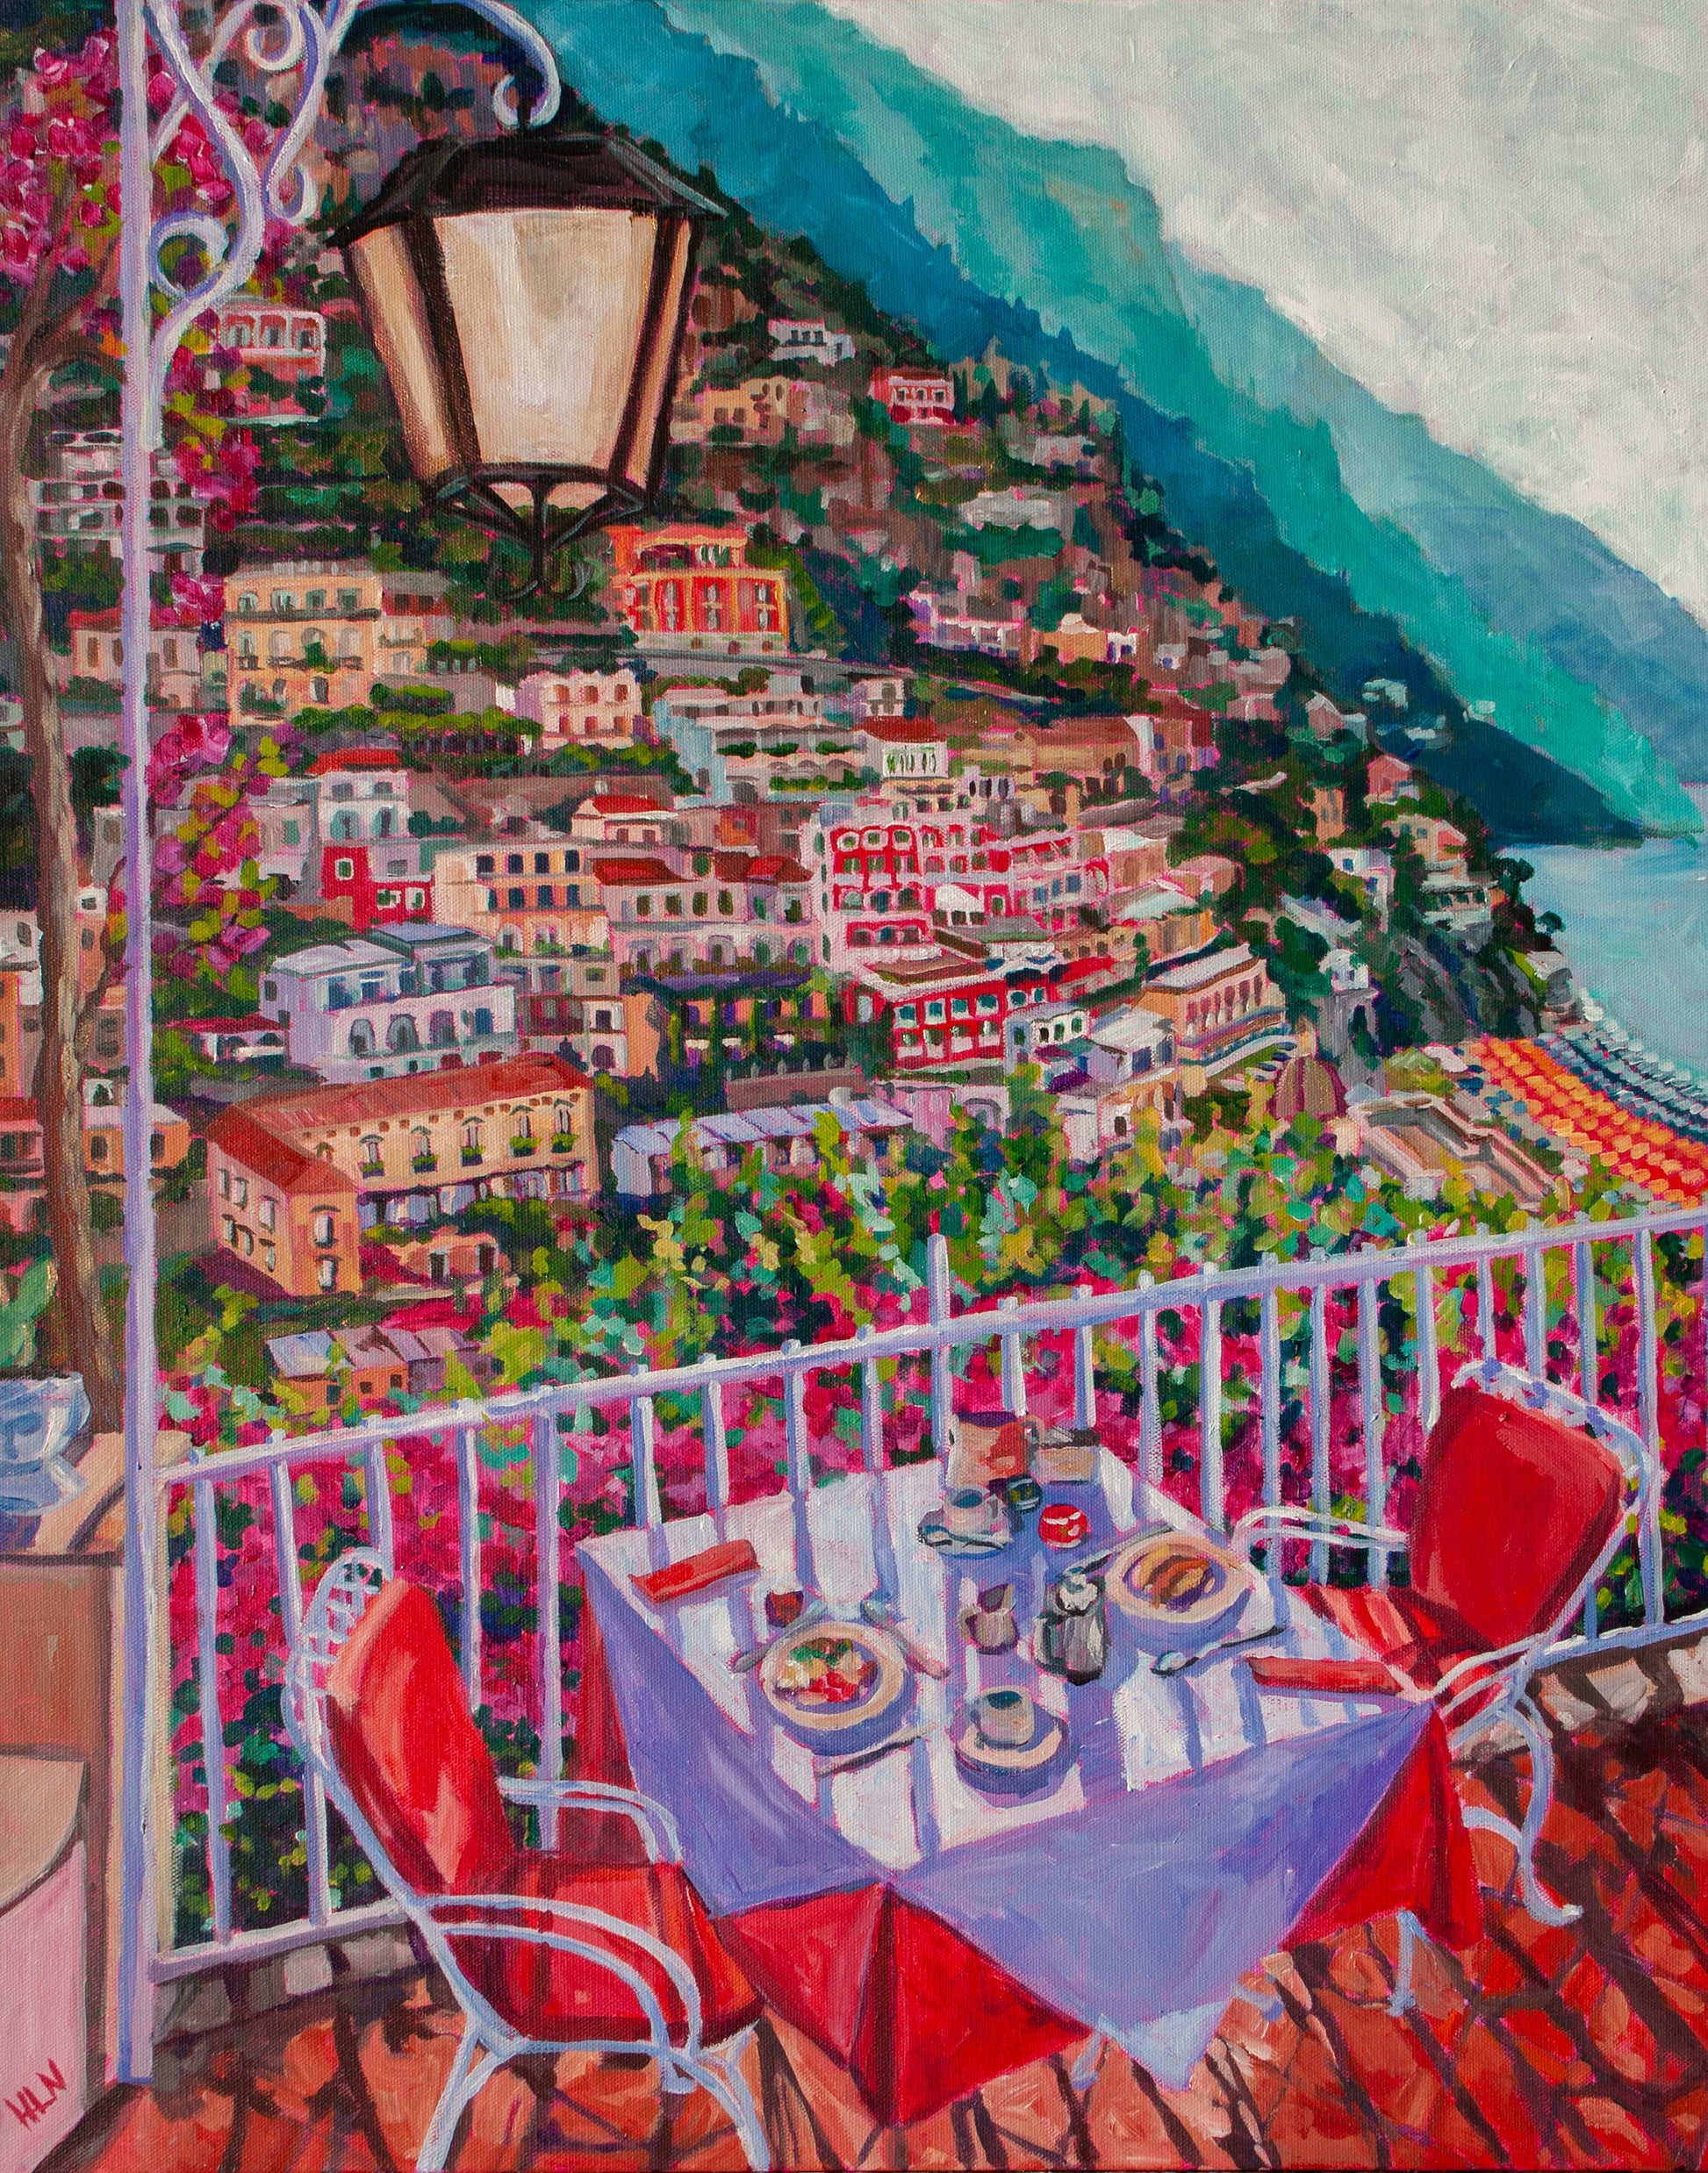 Original vibrant  impressionistic painting of a balcony overlooking the beach of Positano Italy on the Amalfi coast